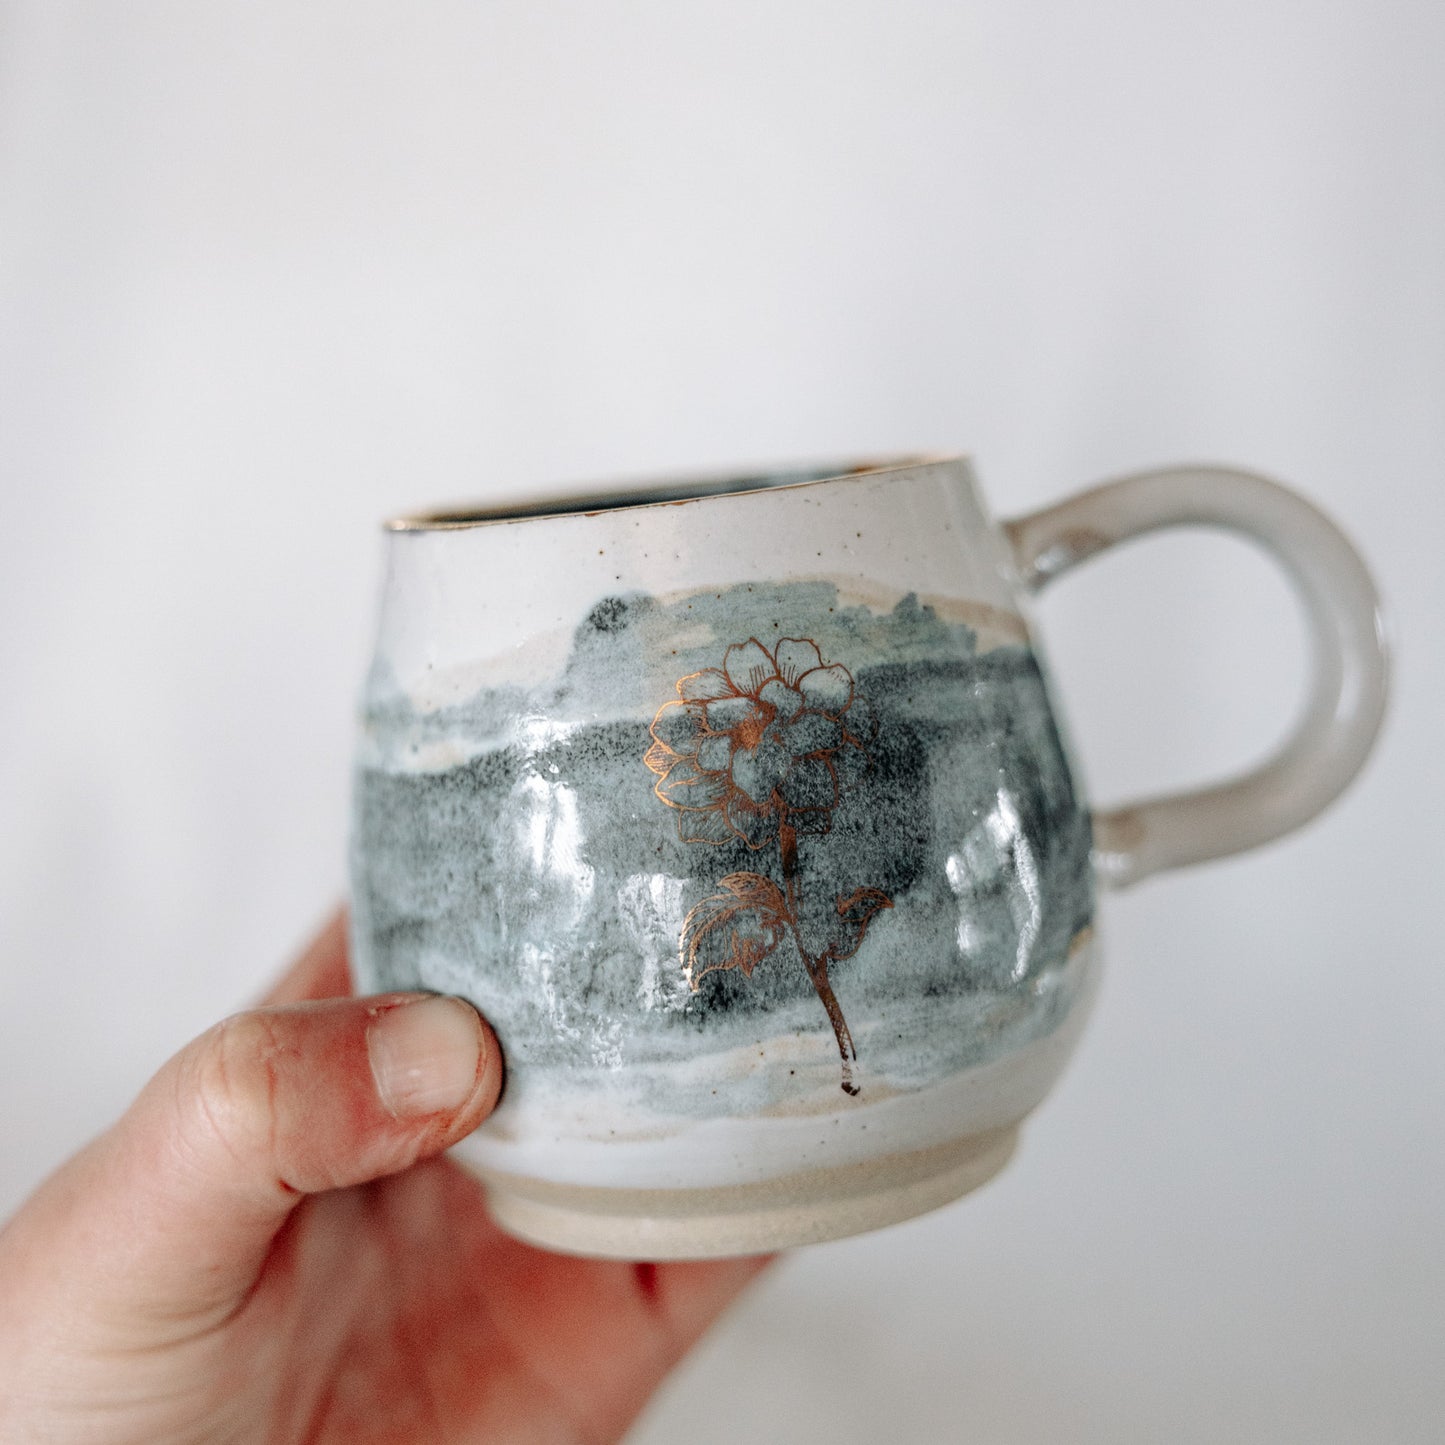 Teal and White Pottery Mug with a Gold Flower Decal